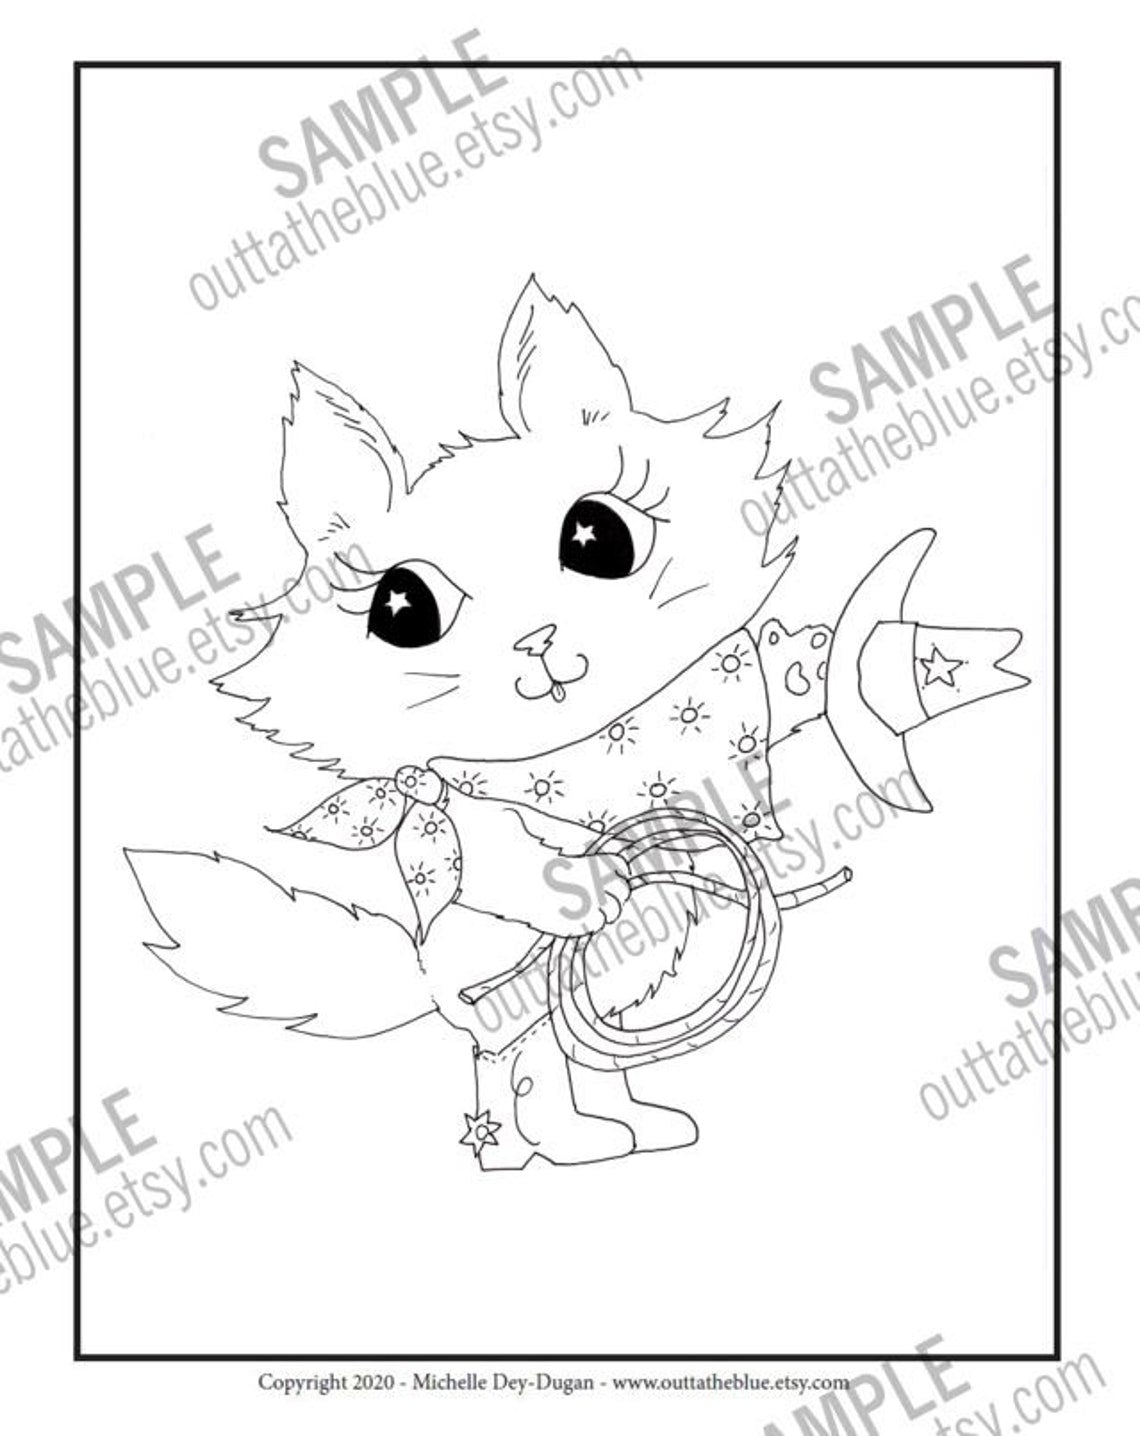 Wee Western Printable Coloring Pages for kids, digital upload PDF files, children's coloring sheets, animal pictures to color, 10 pages